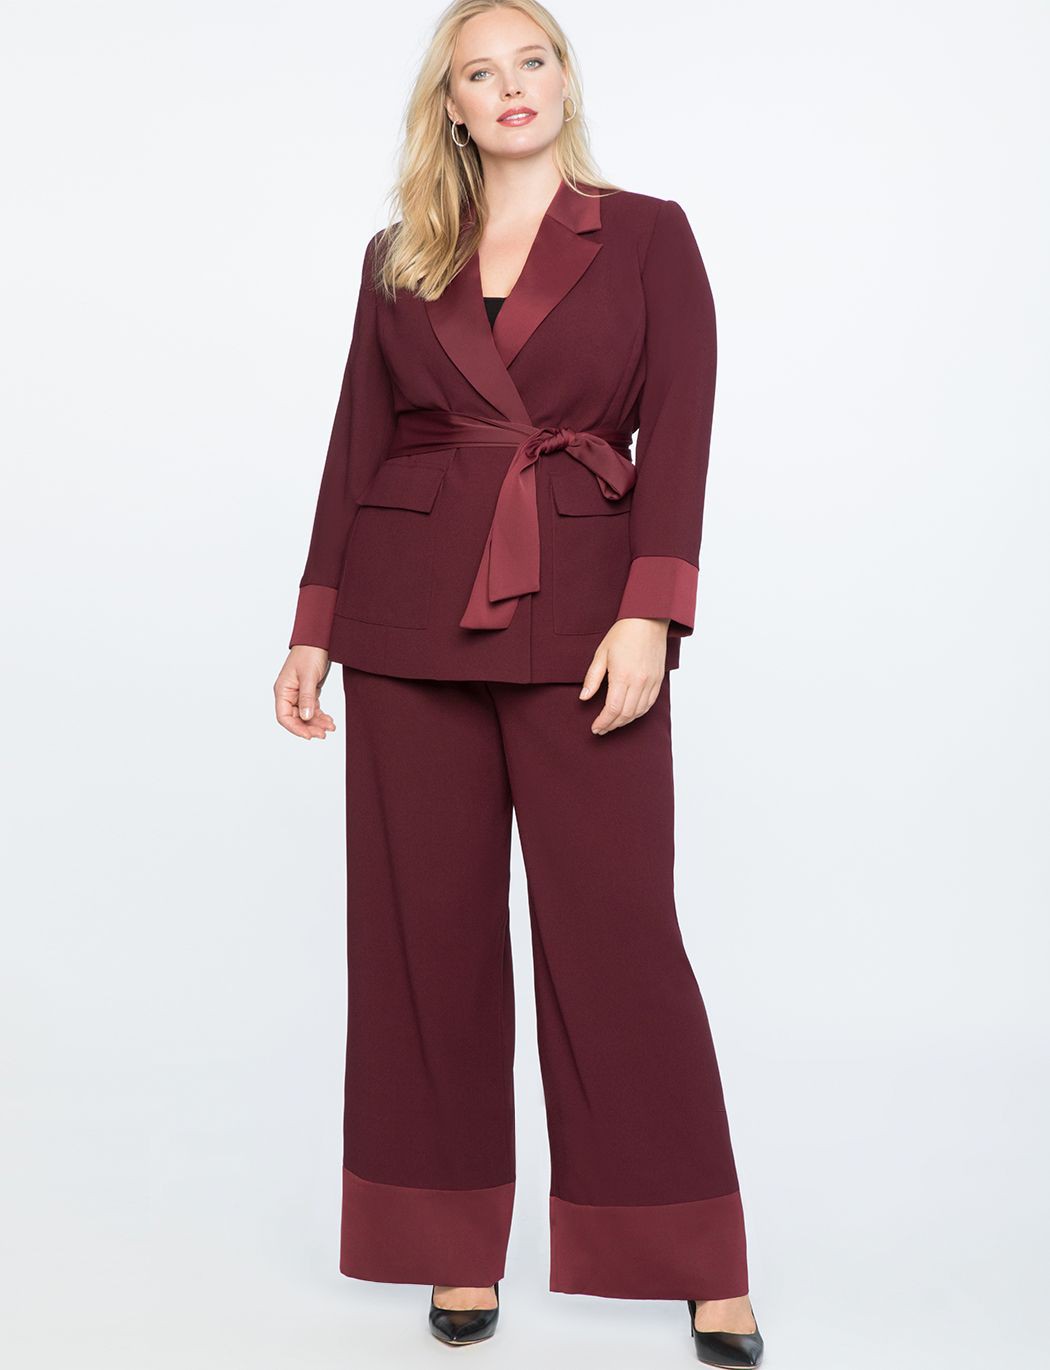 Beautiful Formal Outfits For Professional Work: Summer Work Outfit,  professional Outfit For Teens  